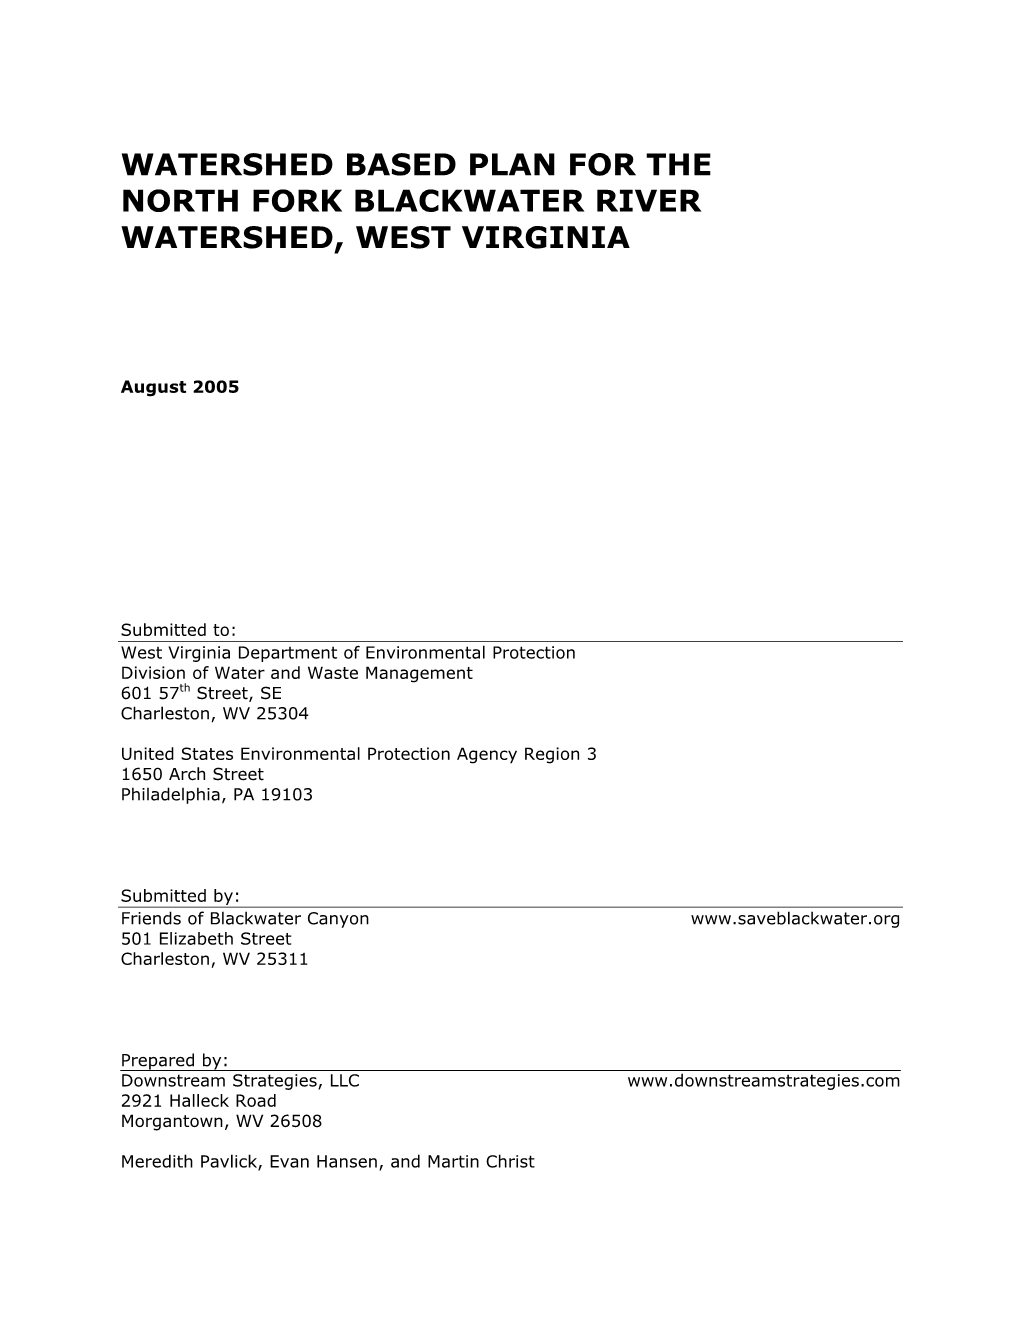 Watershed Based Plan for the North Fork Blackwater River Watershed, West Virginia